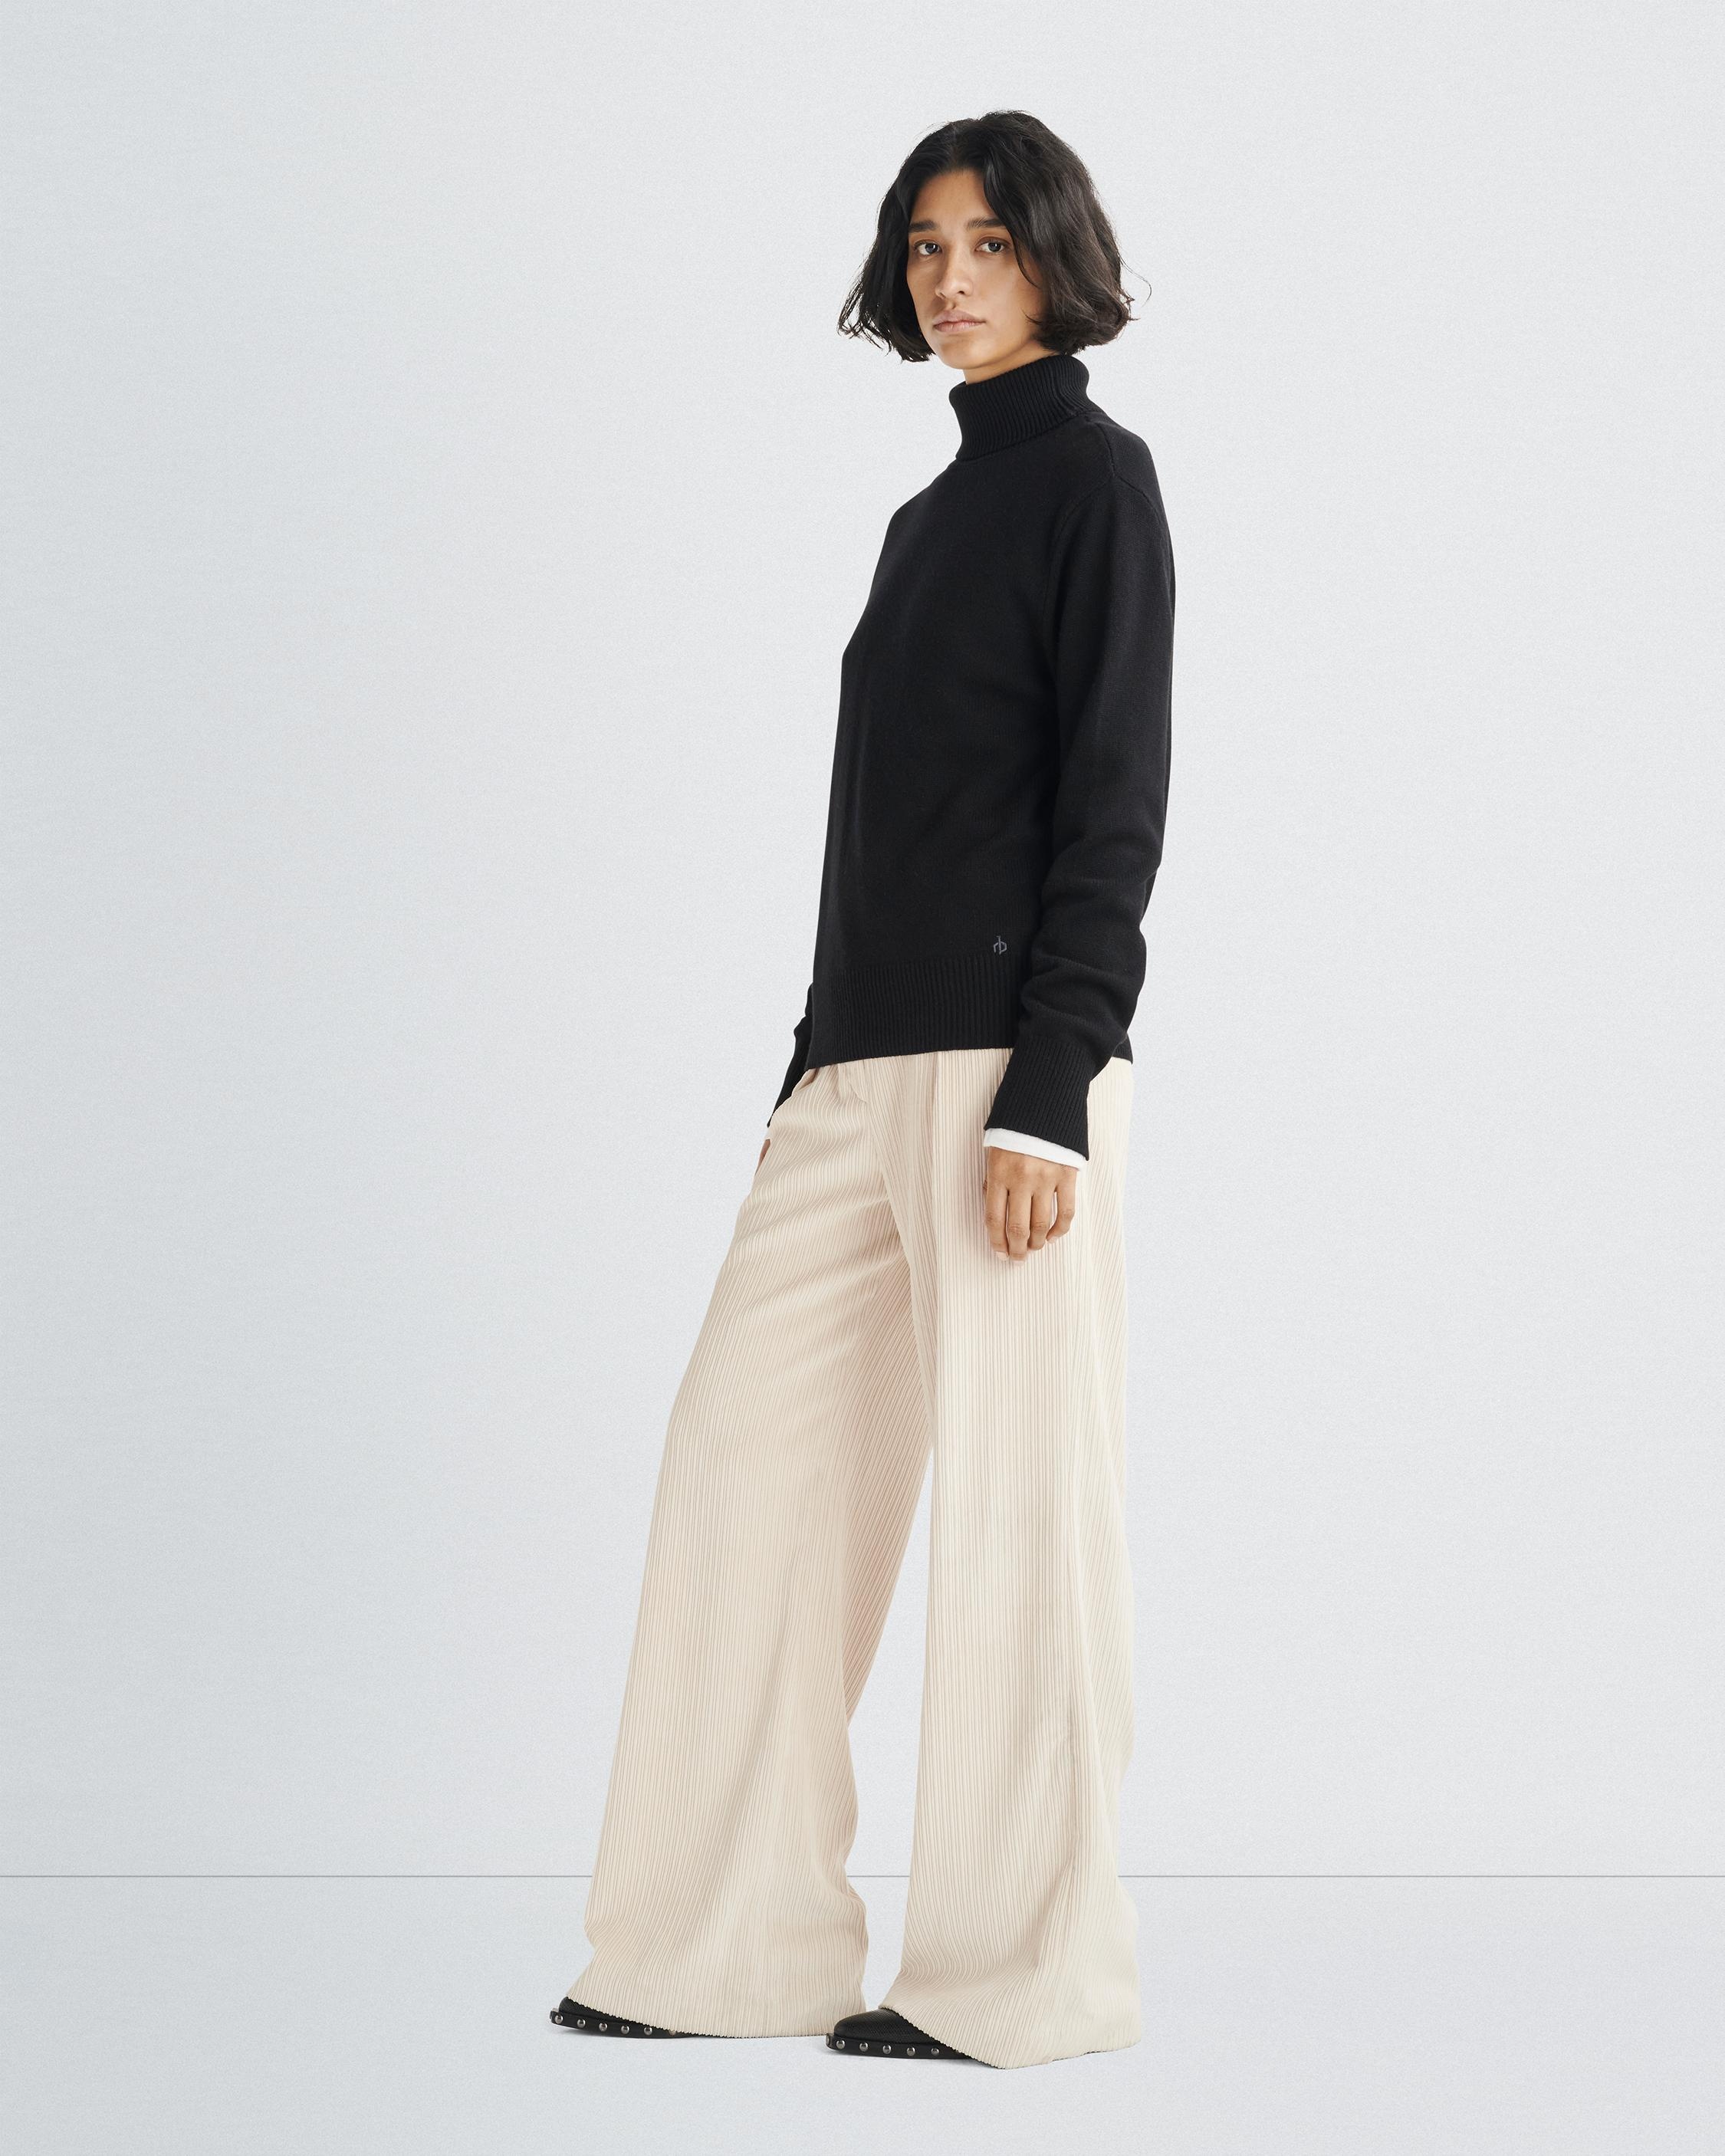 Talan Cashmere Turtleneck
Relaxed Fit - 4